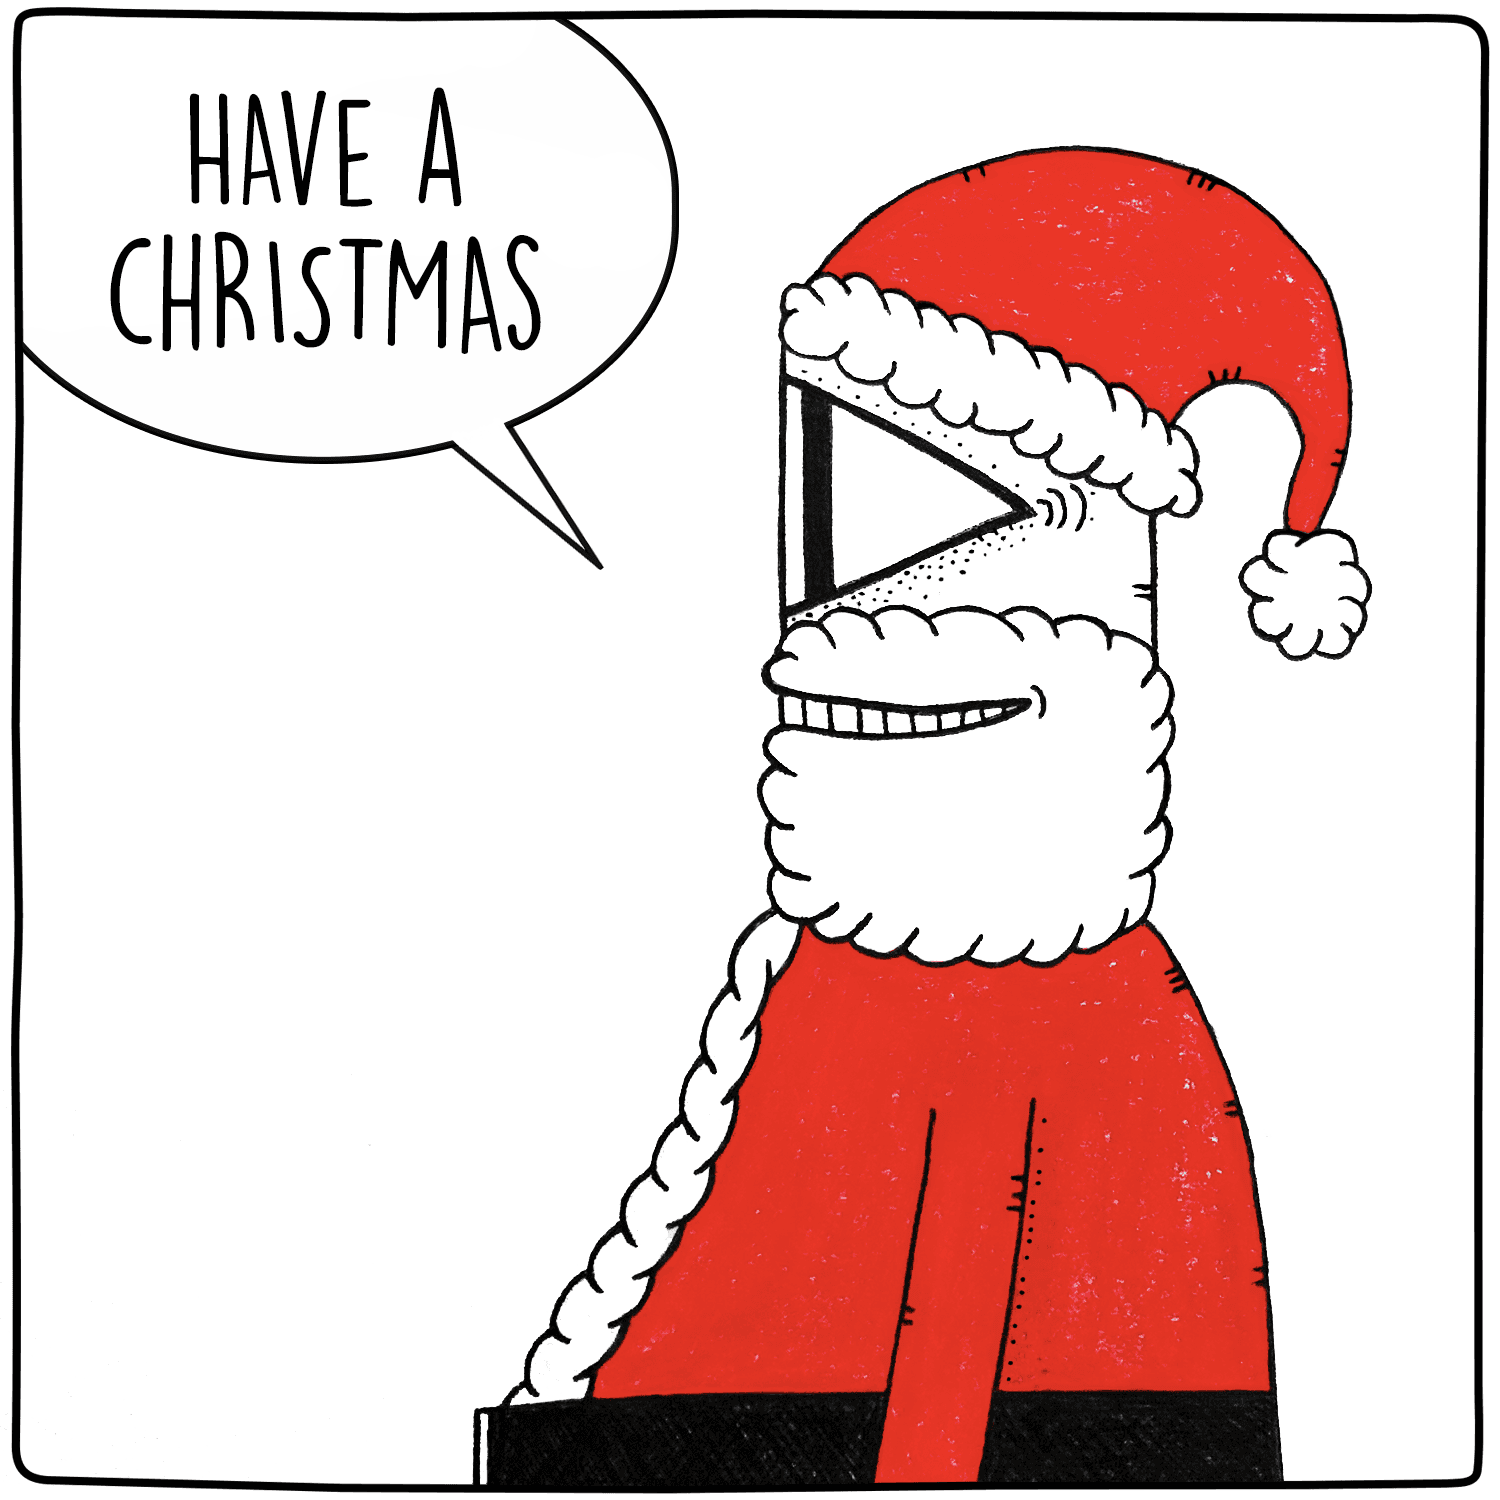 Have a Christmas